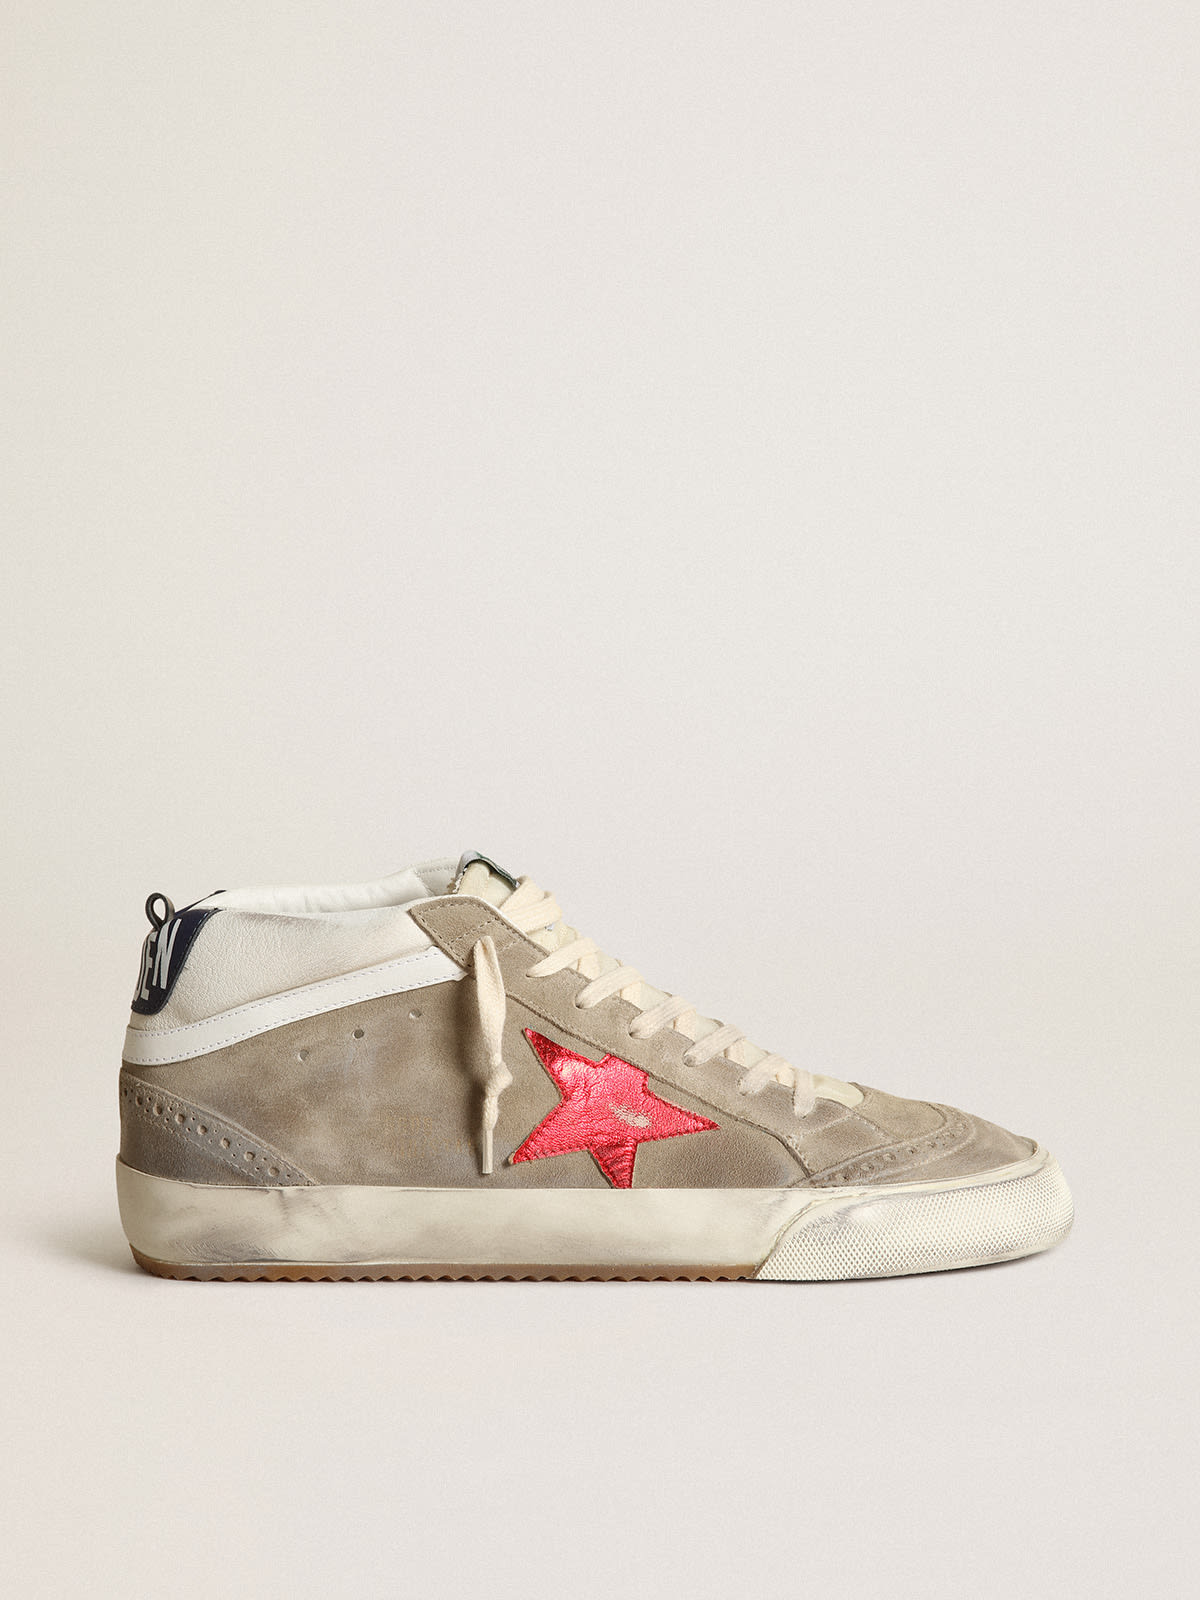 Golden Goose - Mid Star sneakers in dove-gray suede with red metallic leather star and white leather flash in 